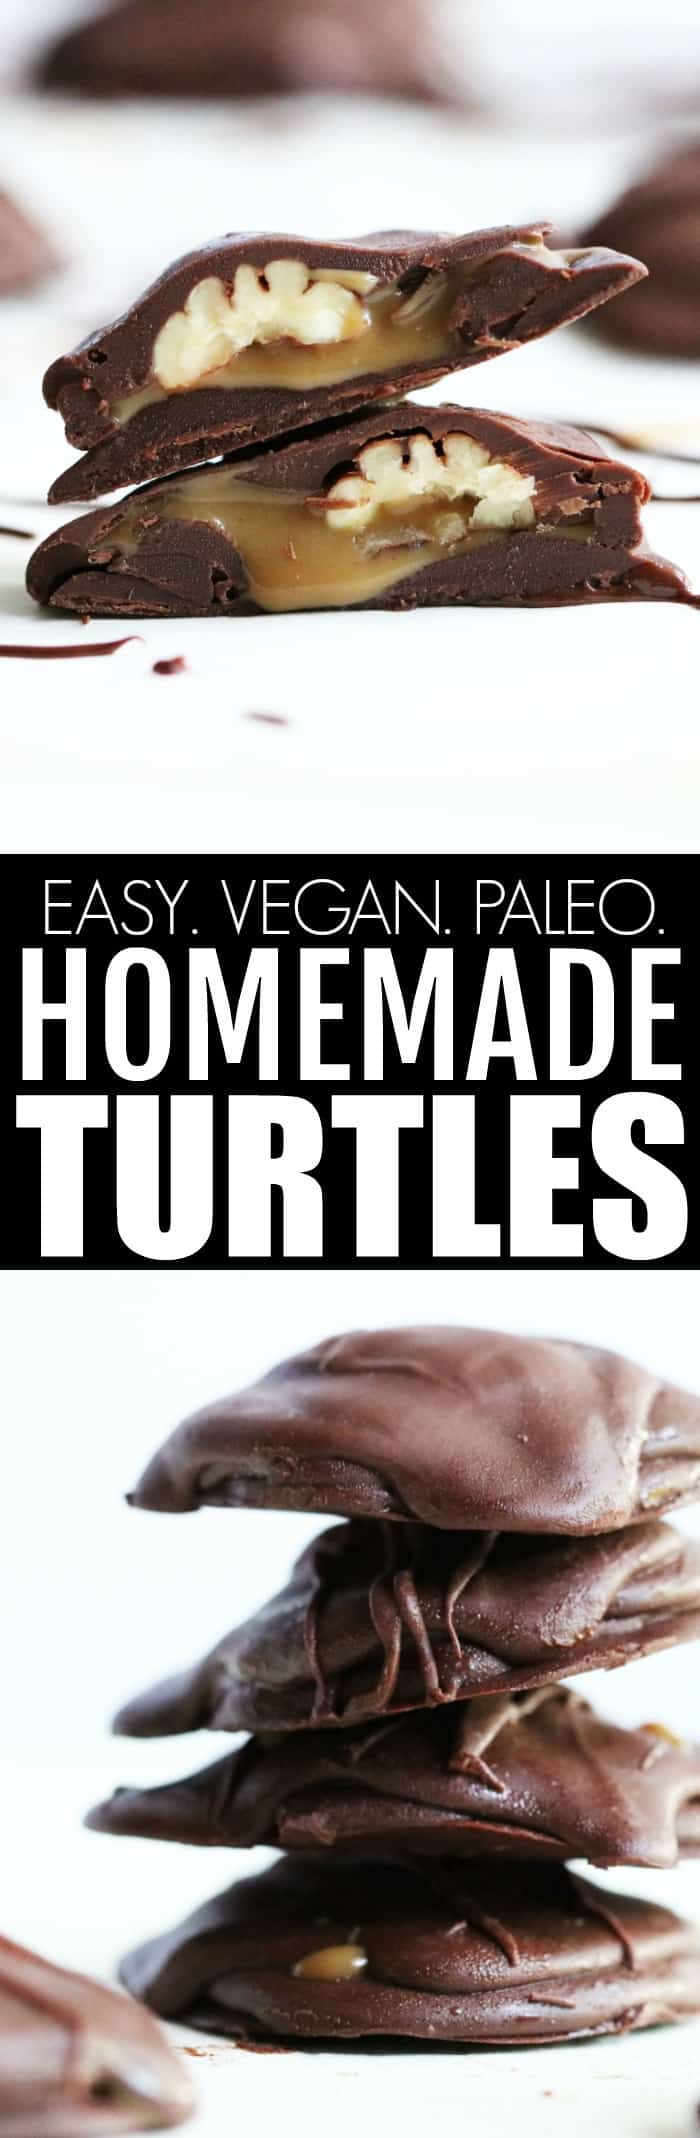 DELICIOUS homemade candy turtles that are paleo, low glycemic, vegan, dairy free, and gluten free! You guys will be making these on repeat, they're so good! thetoastedpinenut.com